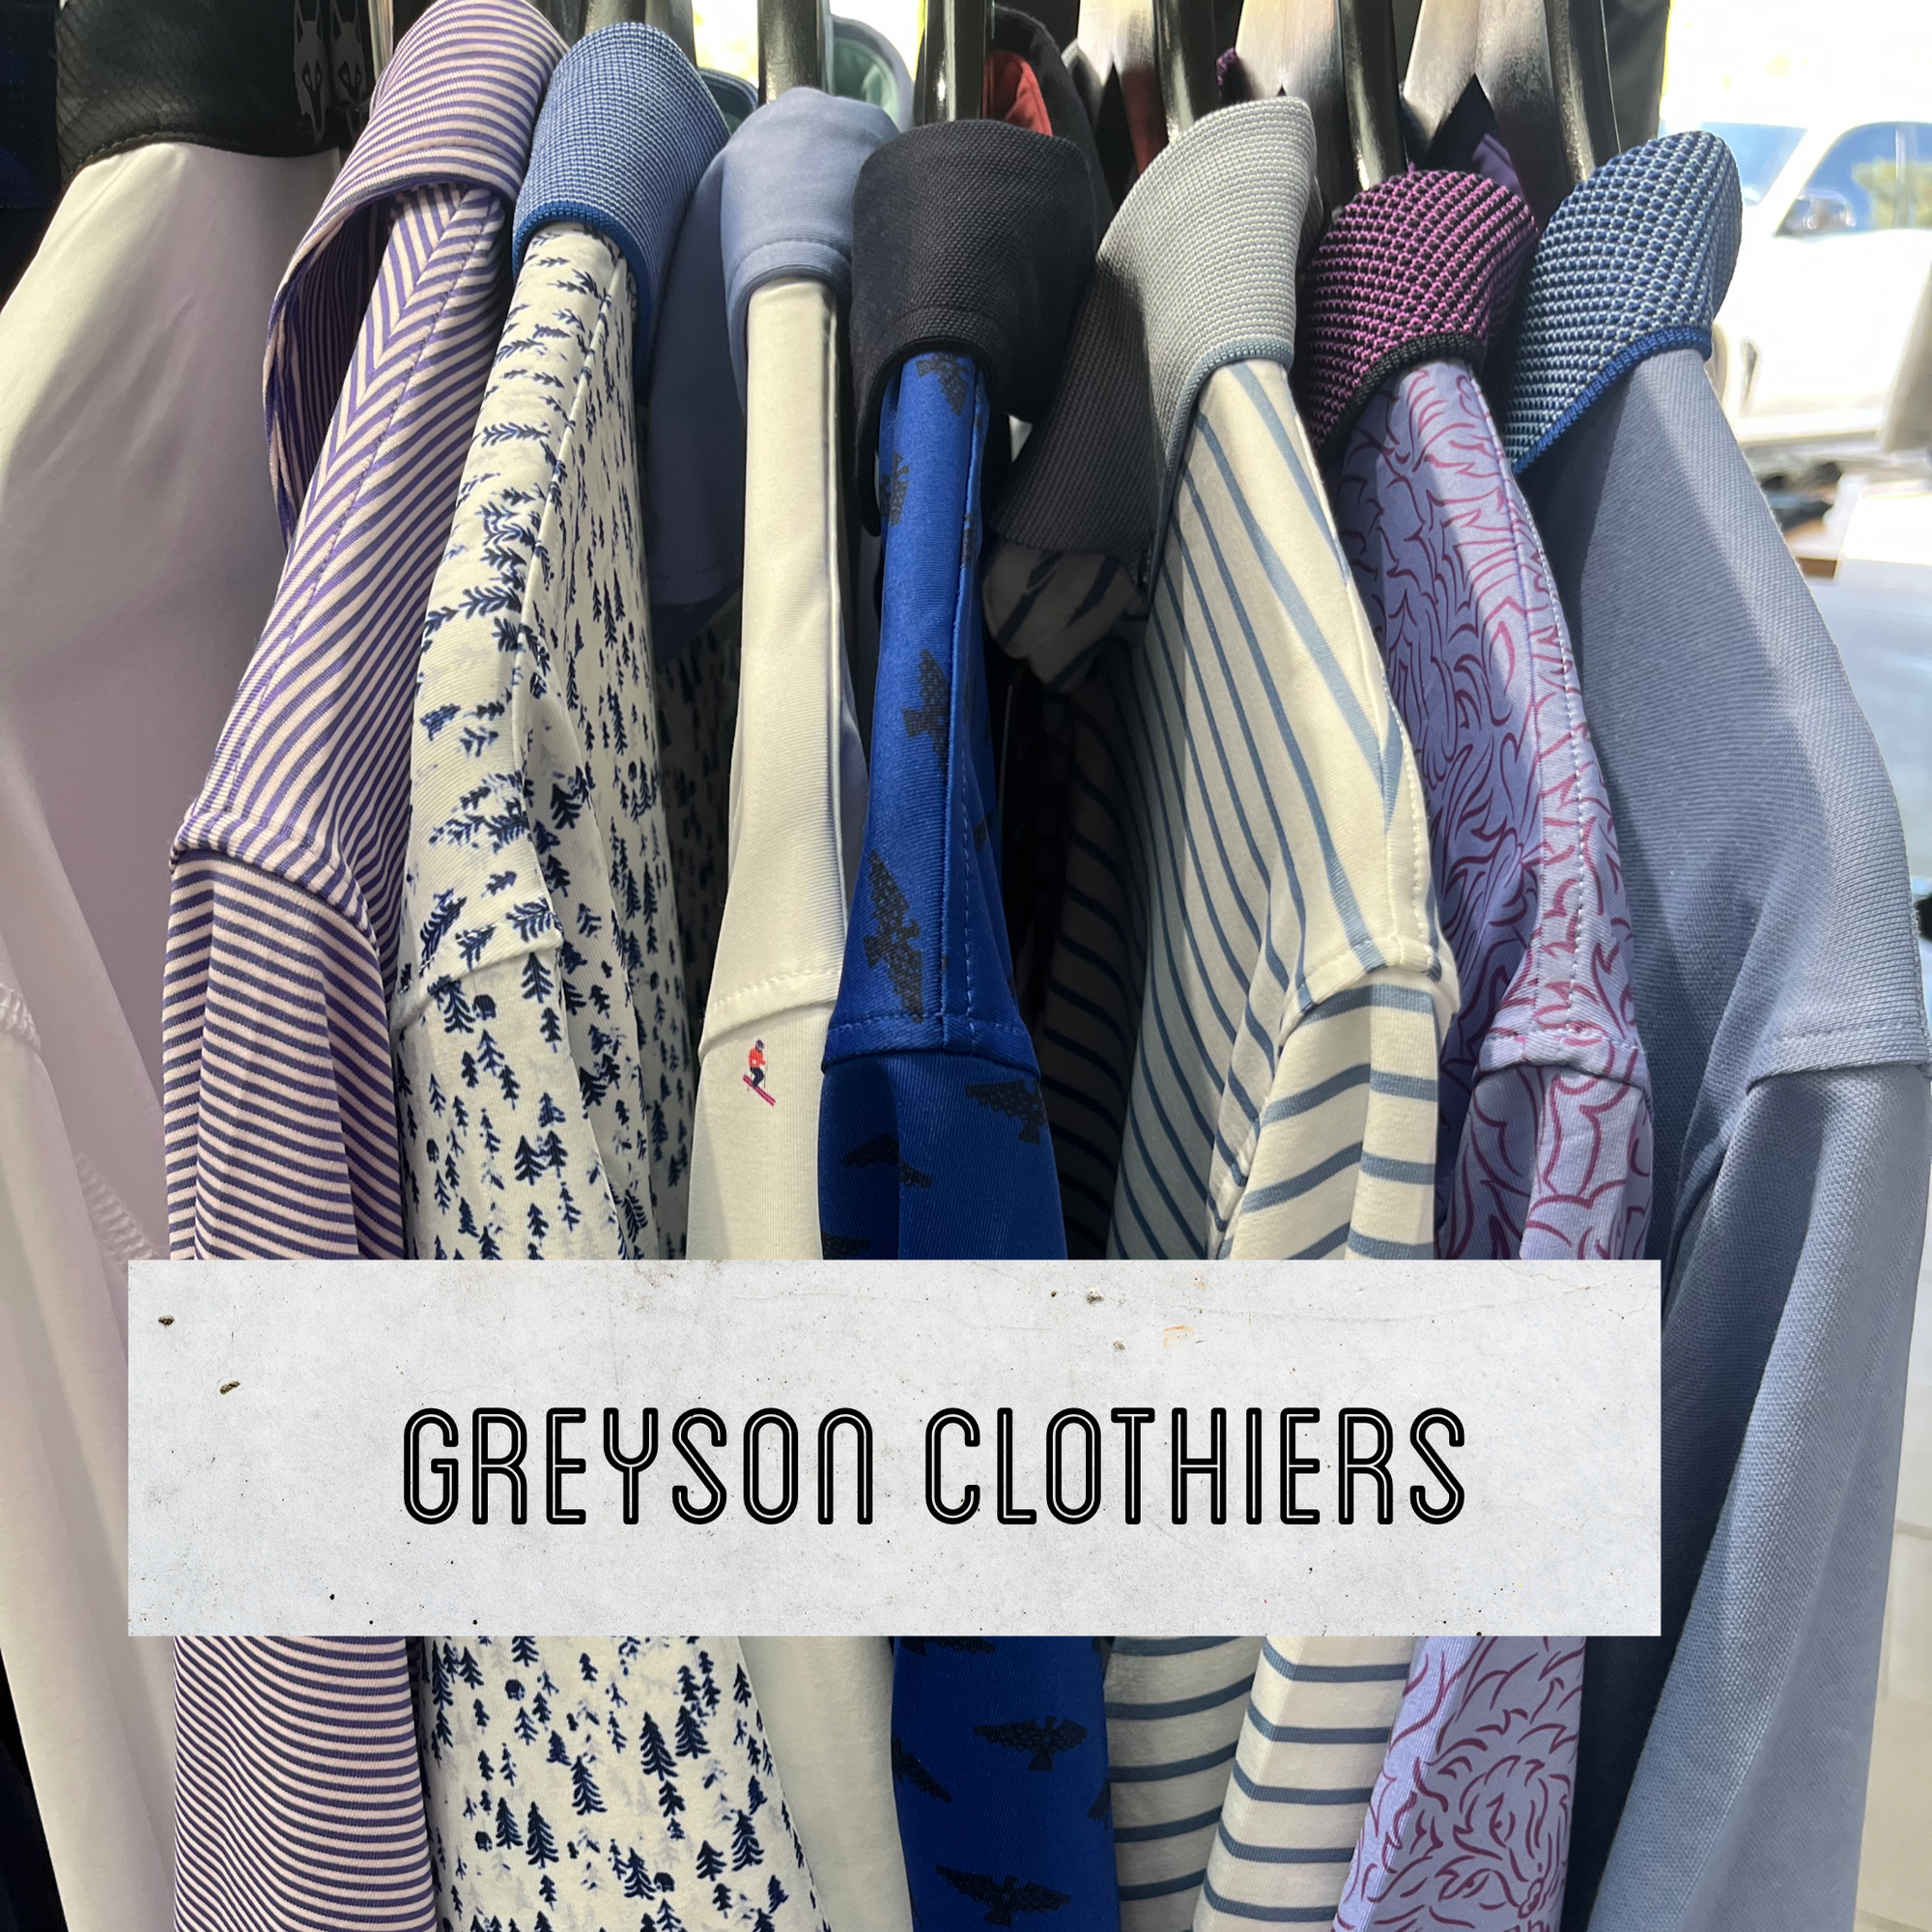 New Greyson Clothiers Collection